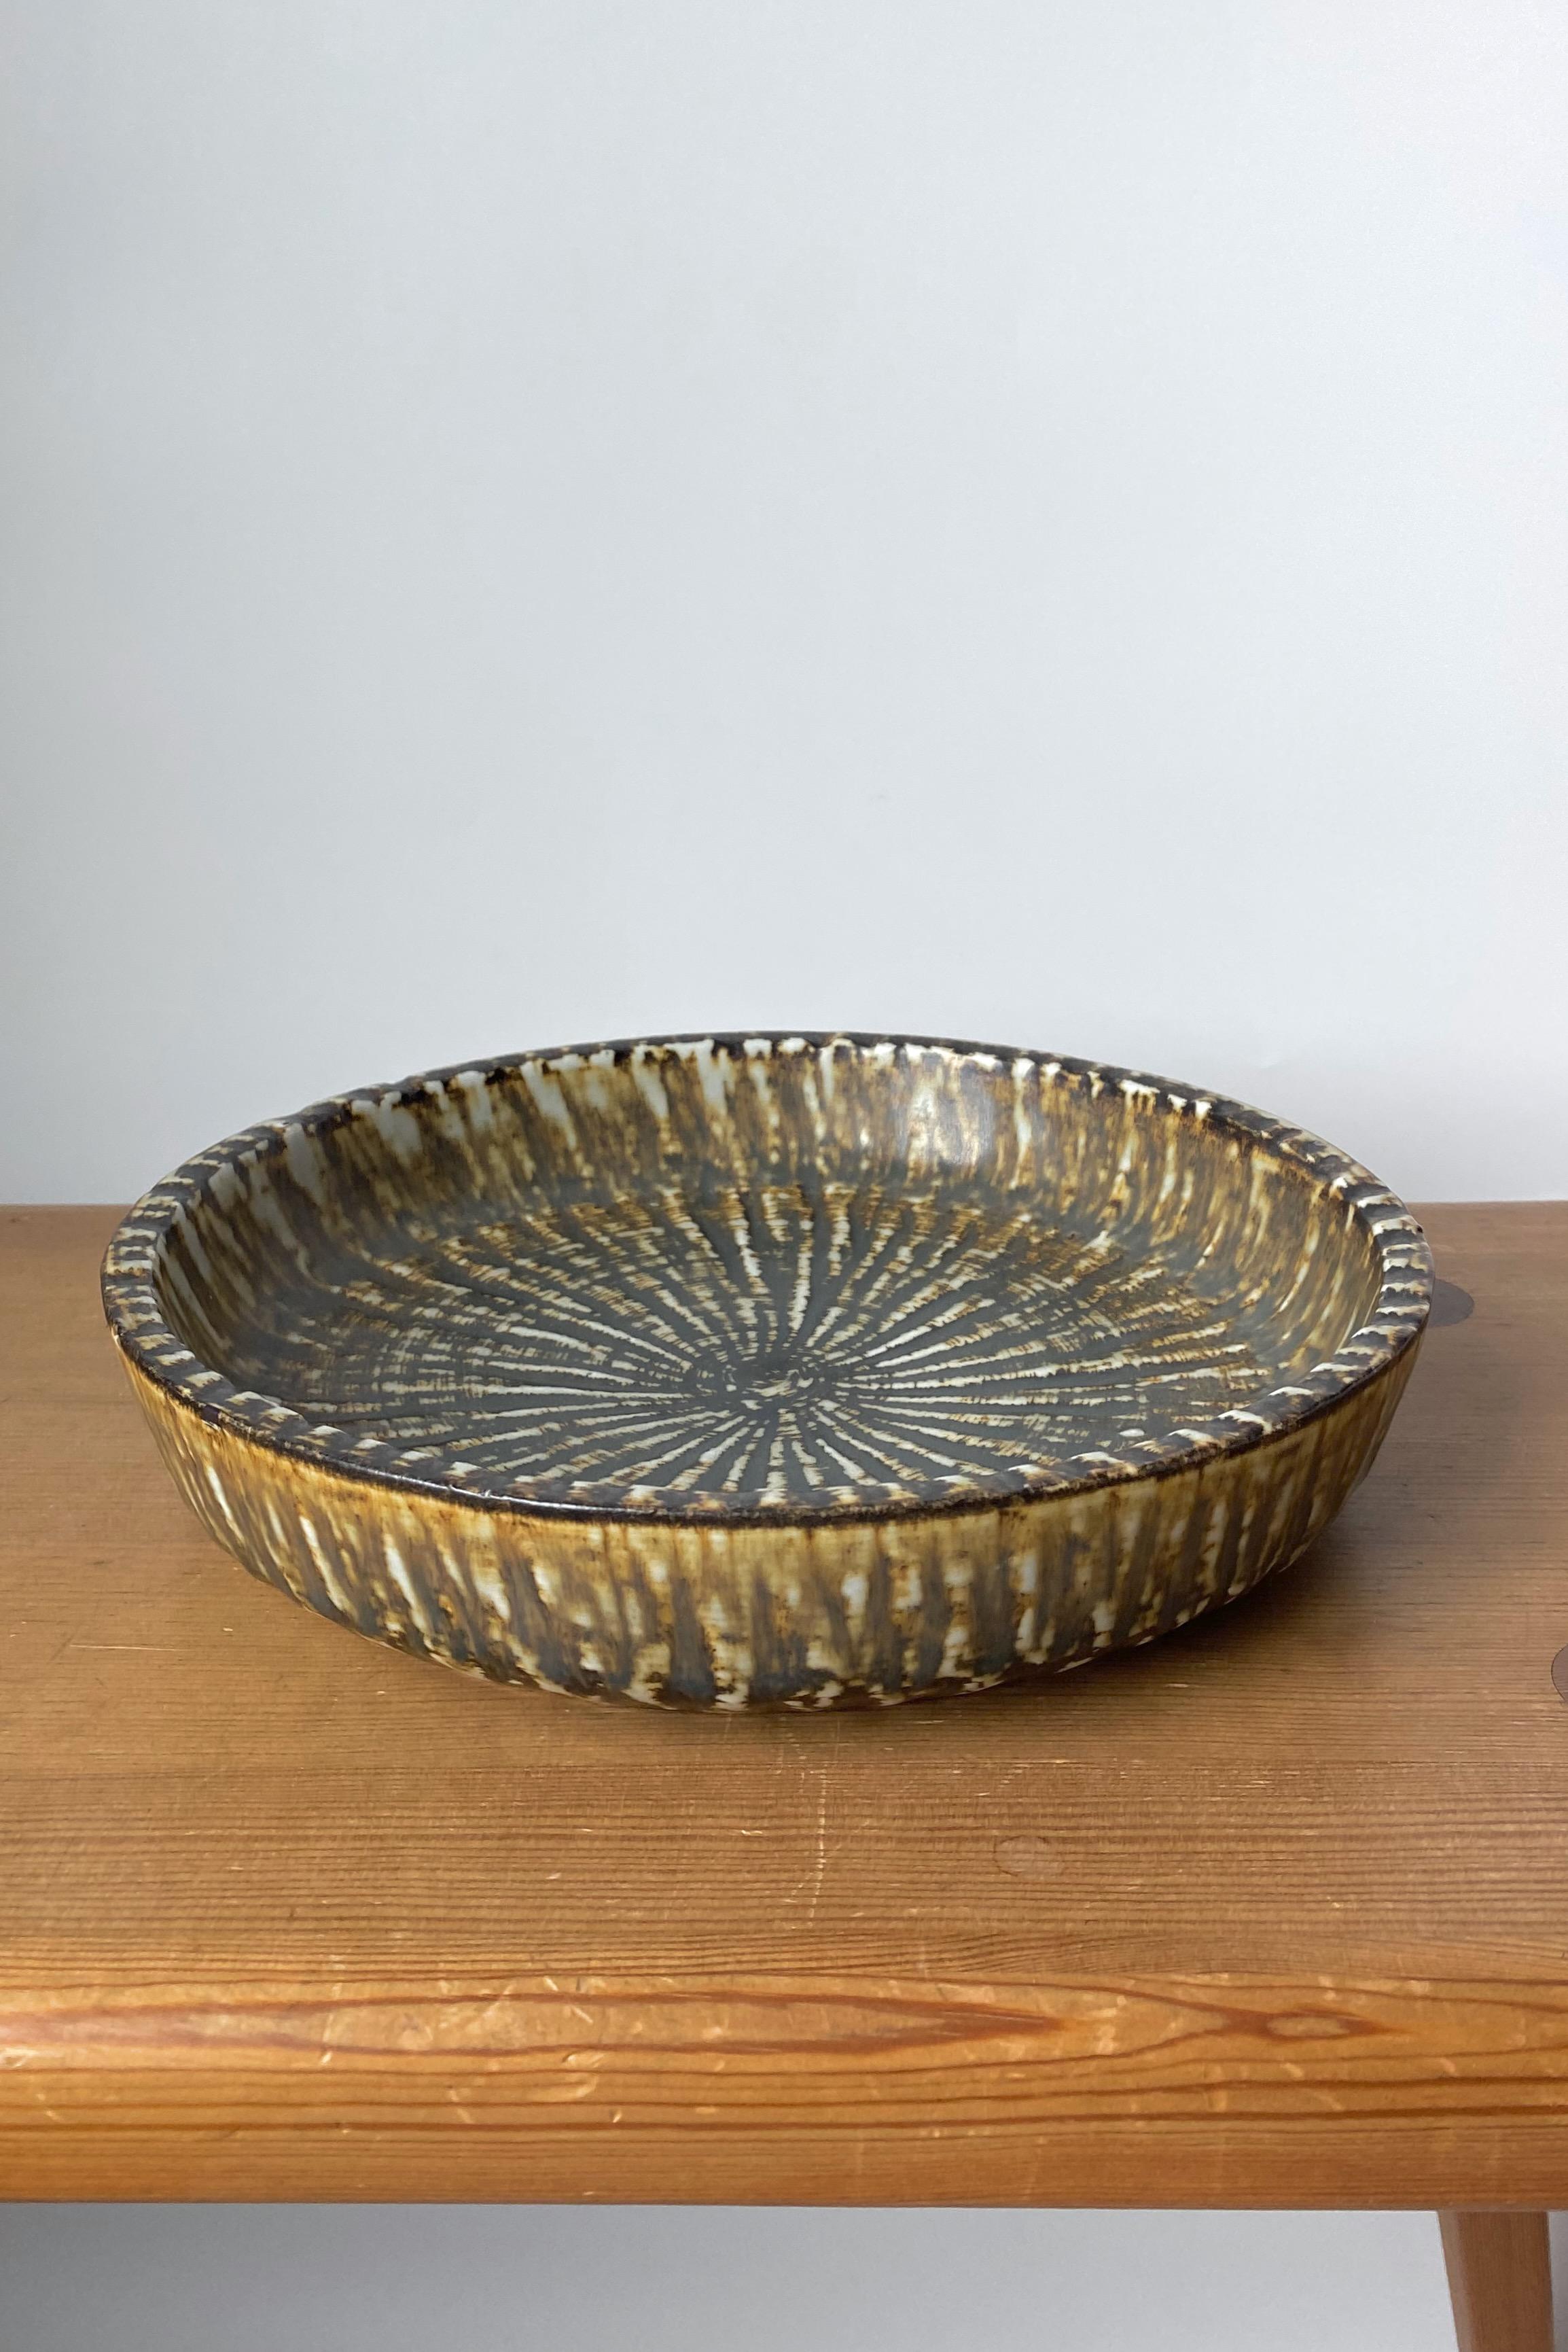 Large Ceramic bowl from the Robus collection by Gunnar Nylund for Rörstrand, Sweden. Decorative flame like design in brown, black and beige colors with designers signature underneath. In a very good vintage condition.

Country: Sweden

Maker: